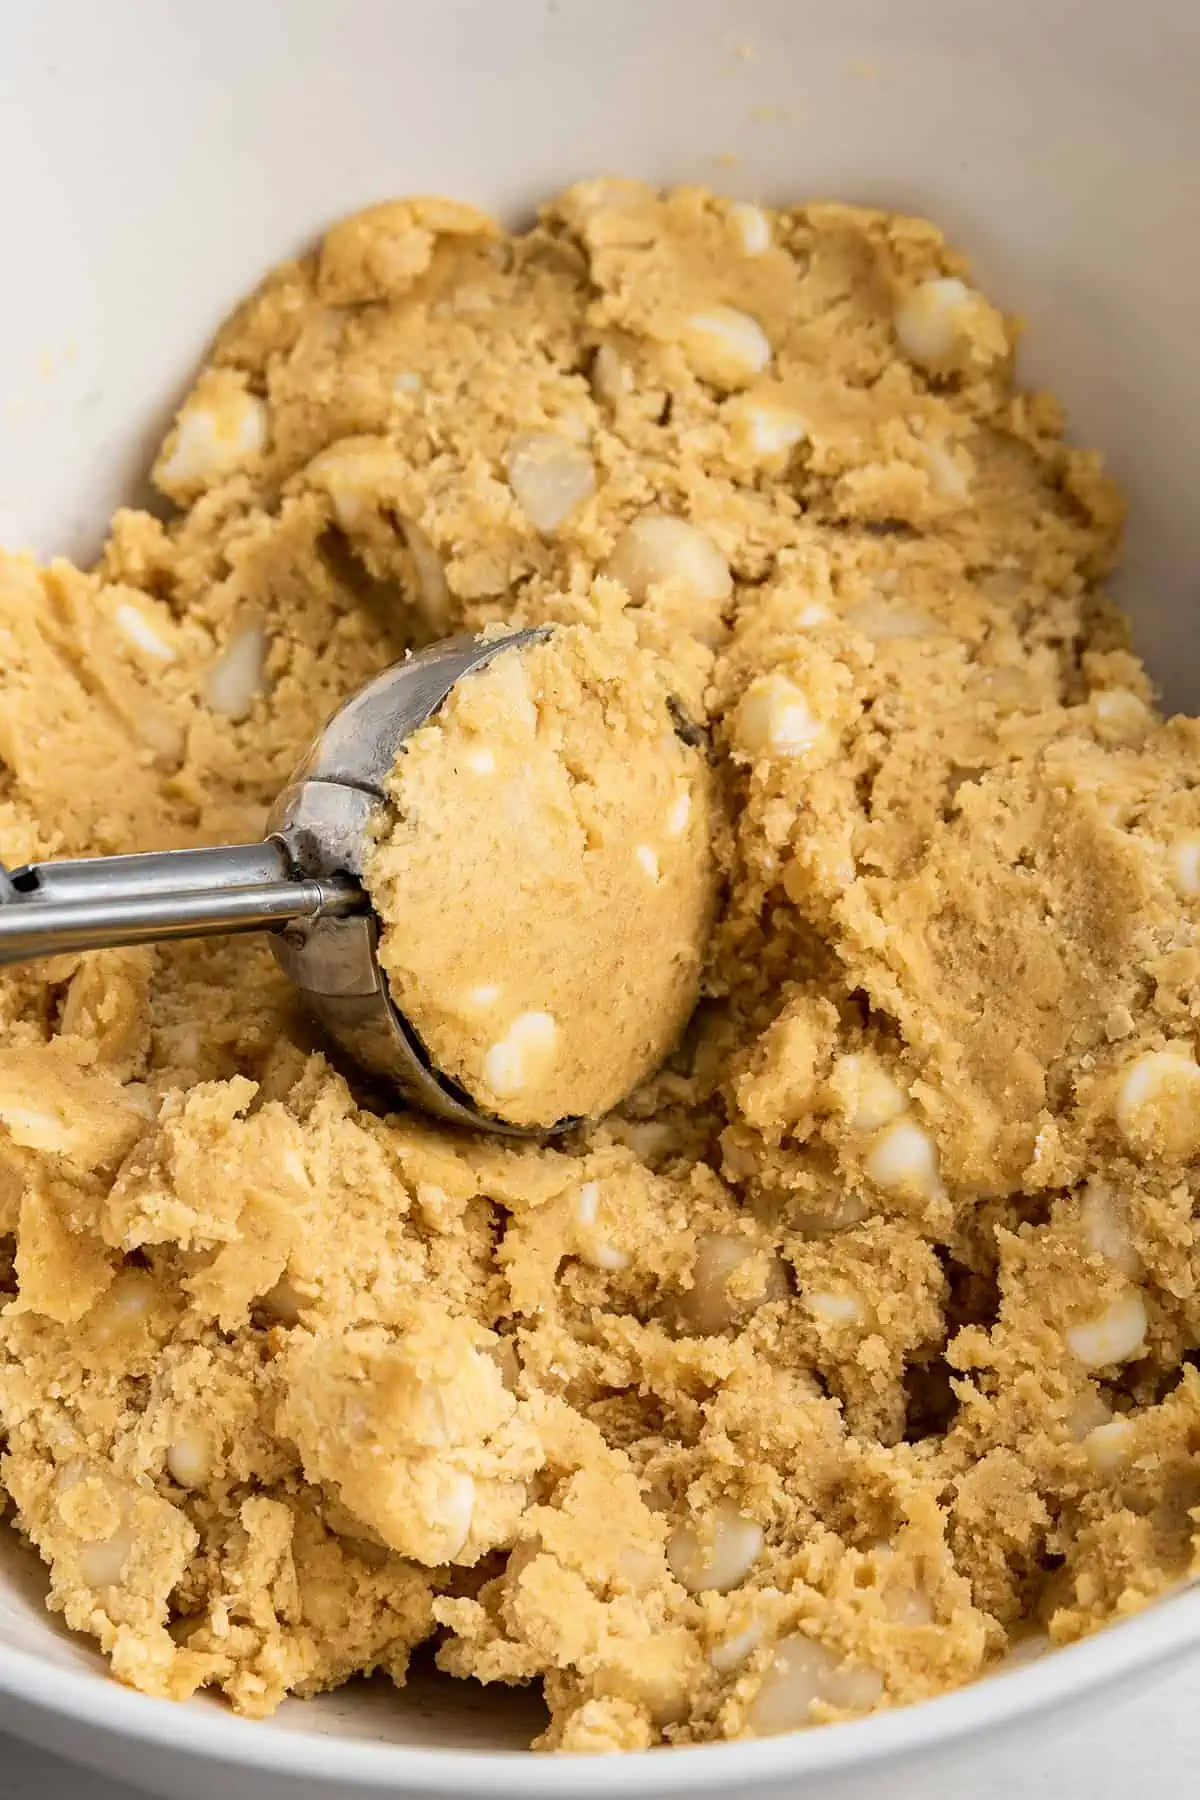 A cookie dough scooper scooping out a ball of cookie dough from a bowl